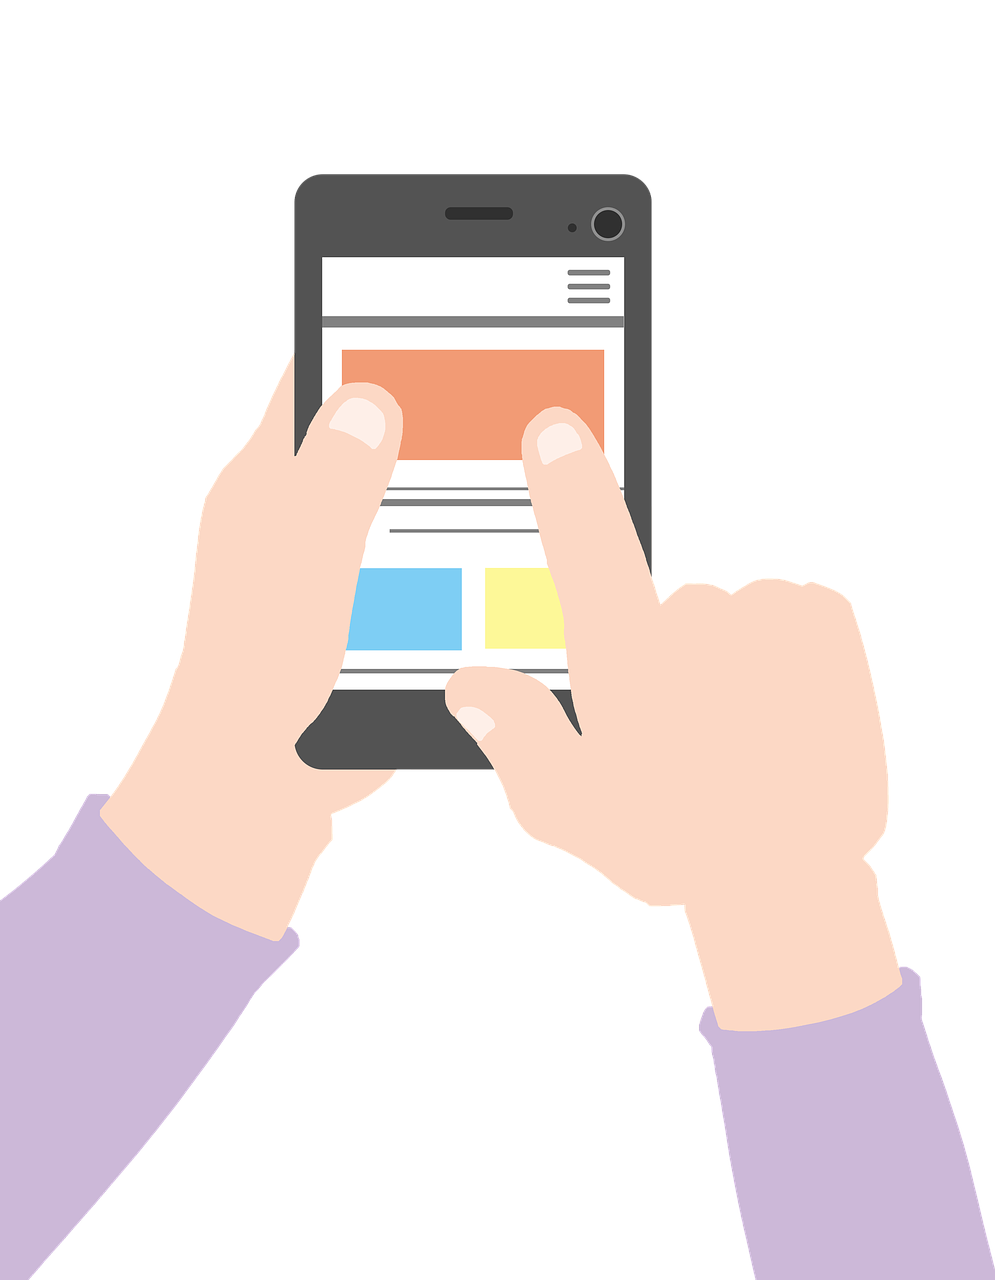 Mobile Friendly Websites Part 1: Recent developments and trends